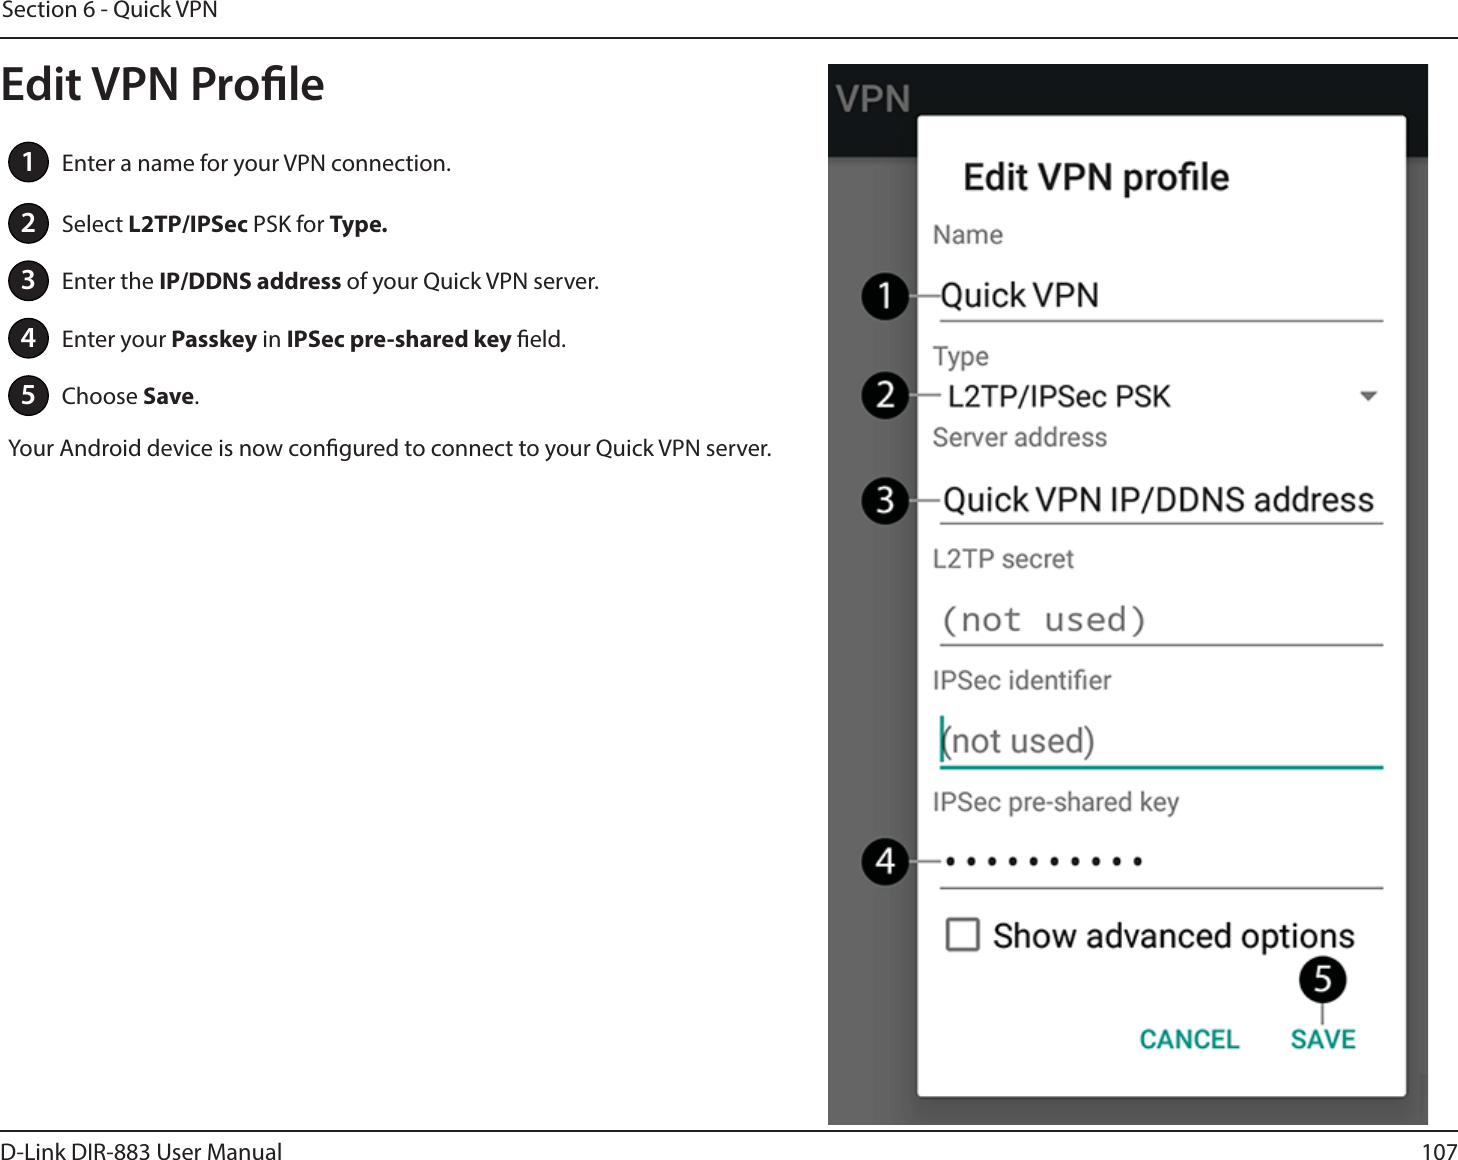 107D-Link DIR-883 User ManualSection 6 - Quick VPN1Enter a name for your VPN connection.2Select L2TP/IPSec PSK for Type.3Enter the IP/DDNS address of your Quick VPN server.4Enter your Passkey in IPSec pre-shared key eld.5Choose Save.Your Android device is now congured to connect to your Quick VPN server.Edit VPN Prole